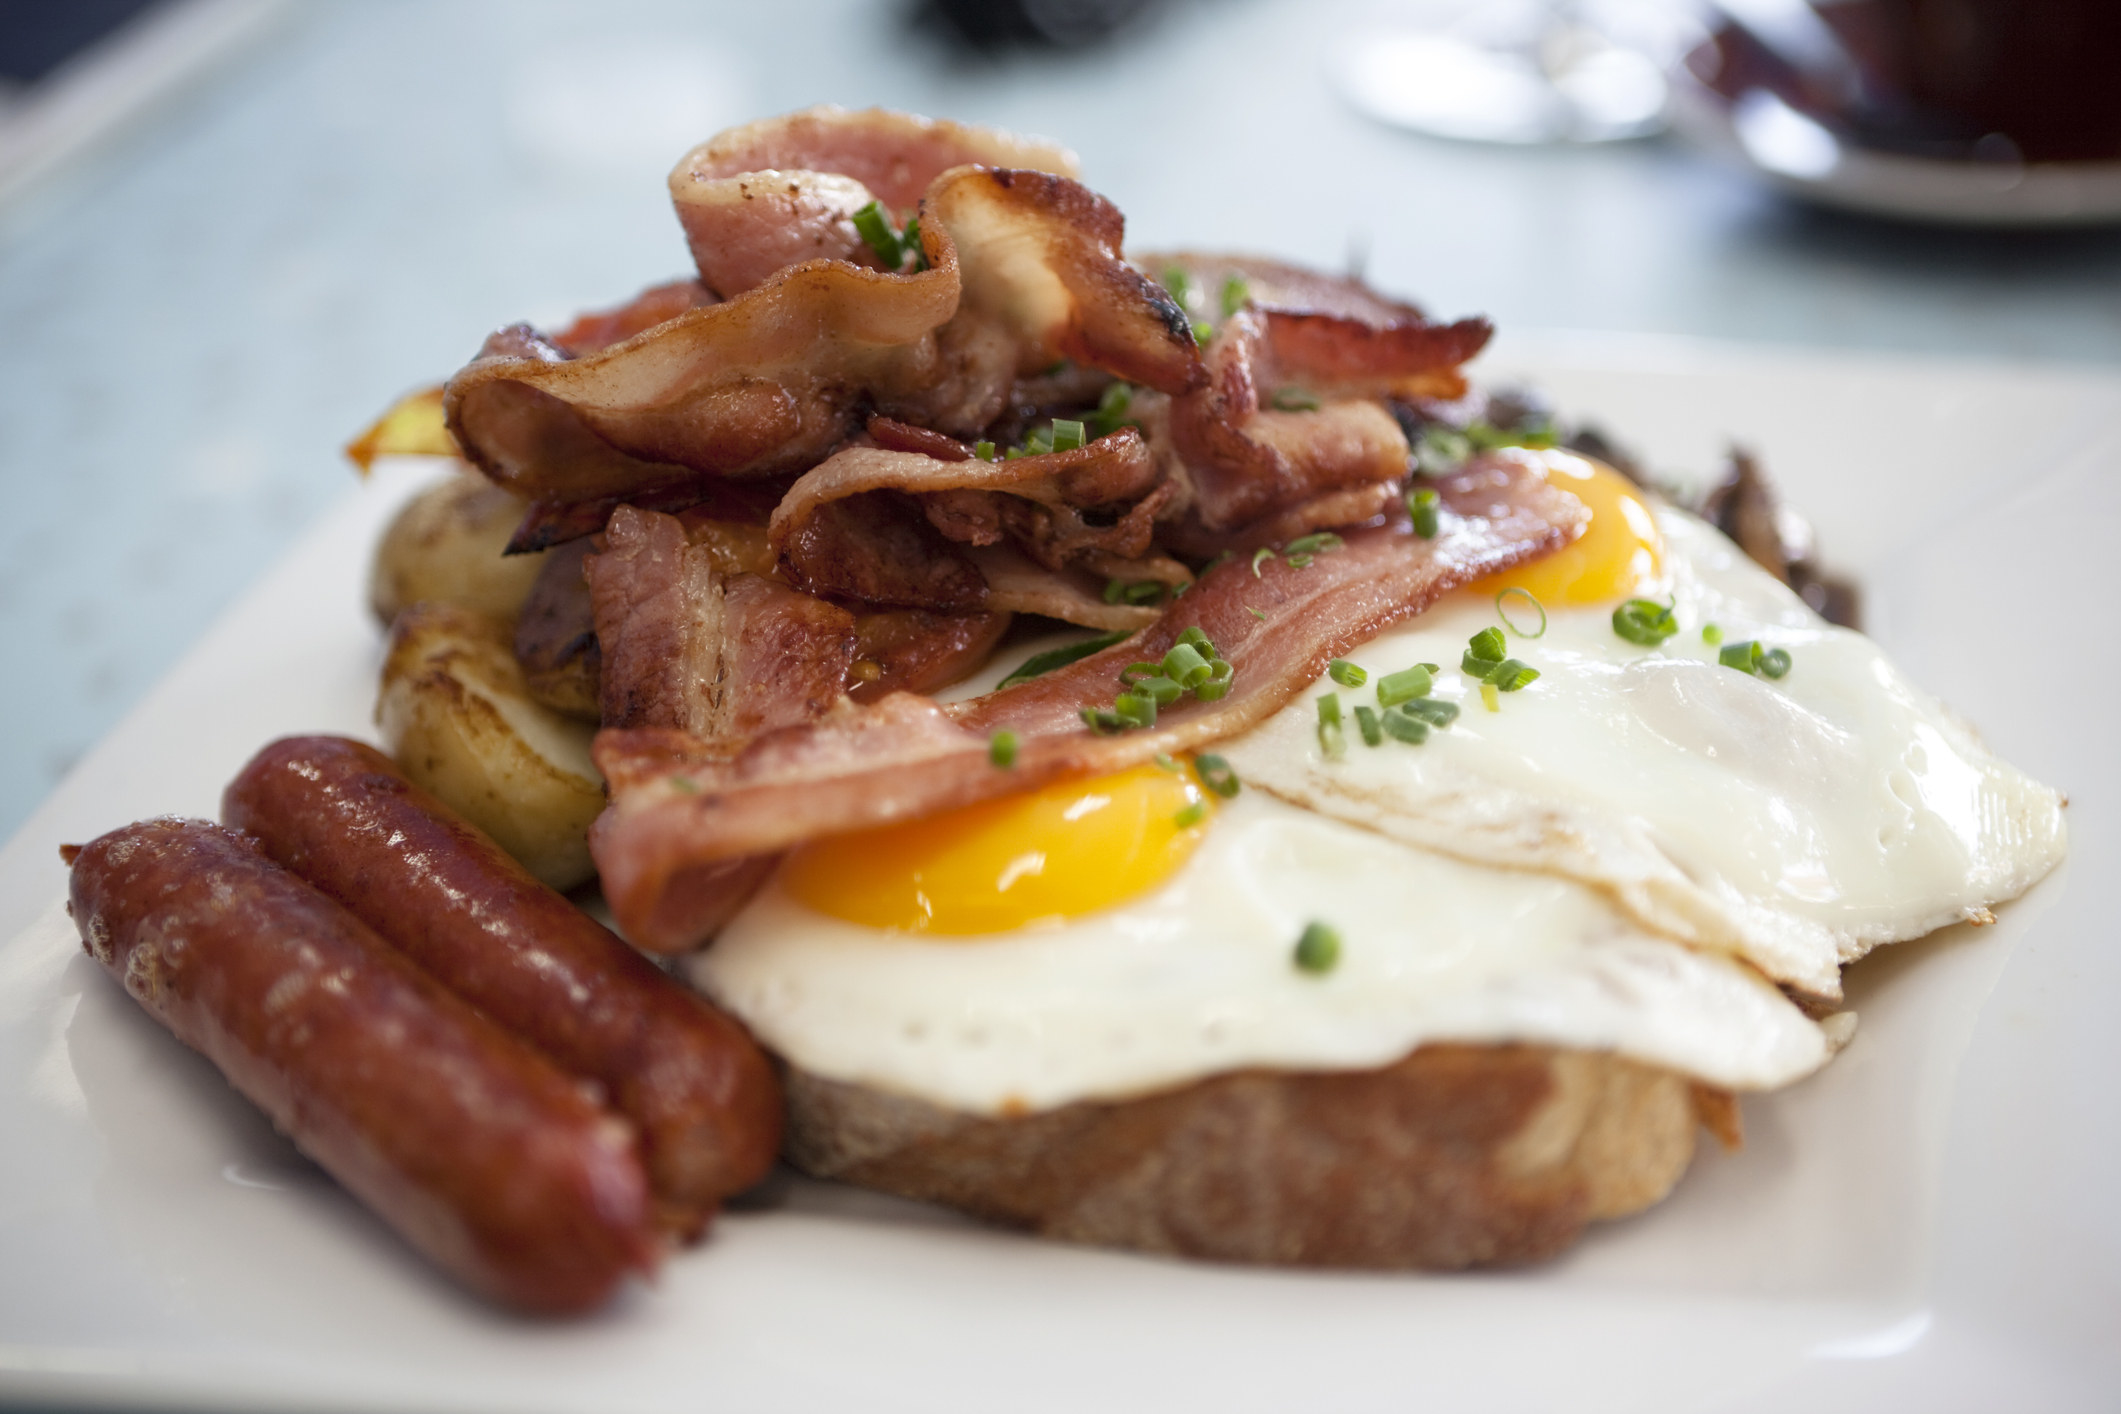 A plate of traditional bacon, fried eggs, sausages and potatoes.